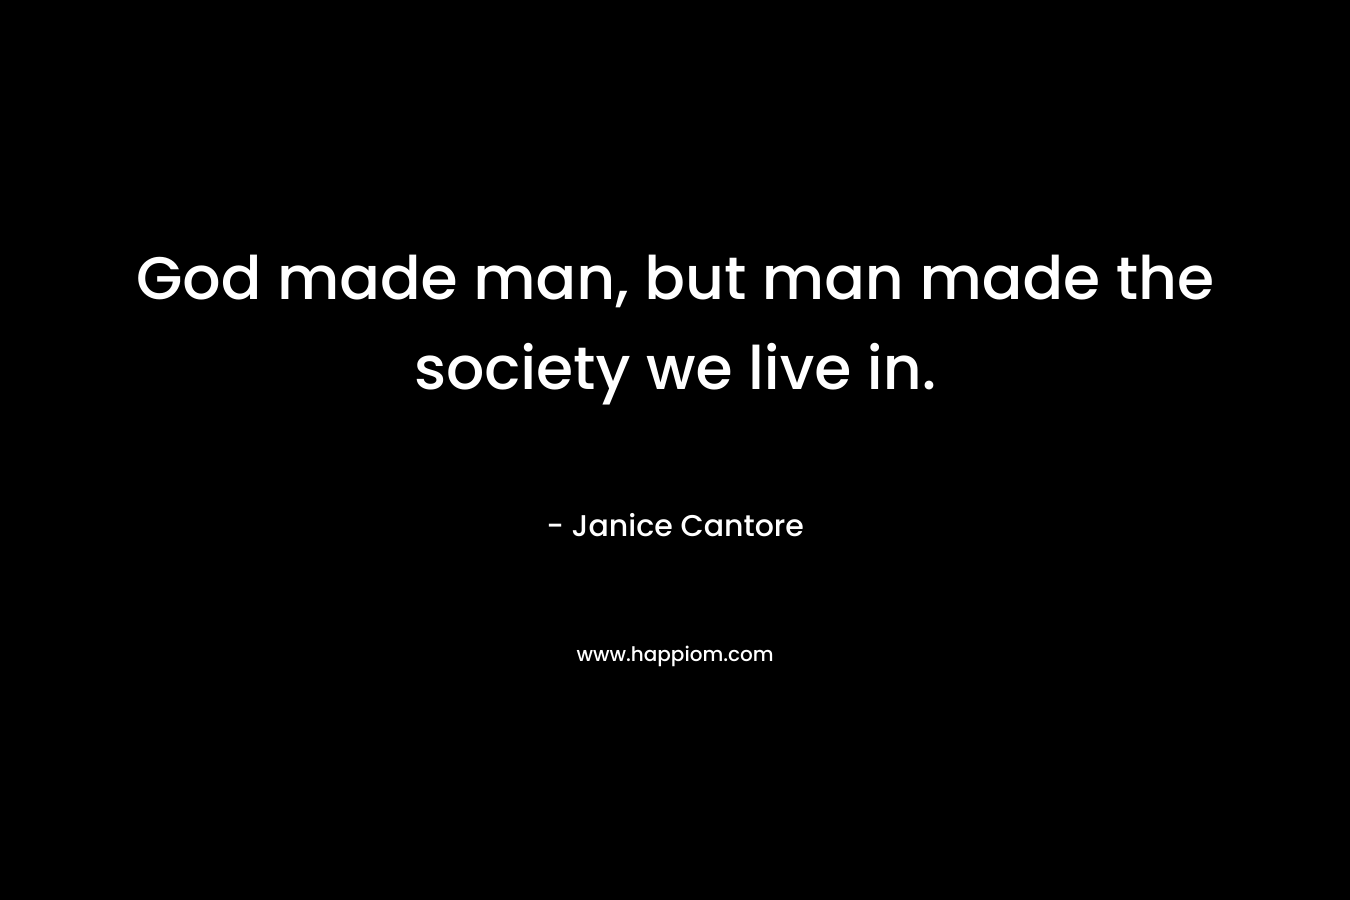 God made man, but man made the society we live in.